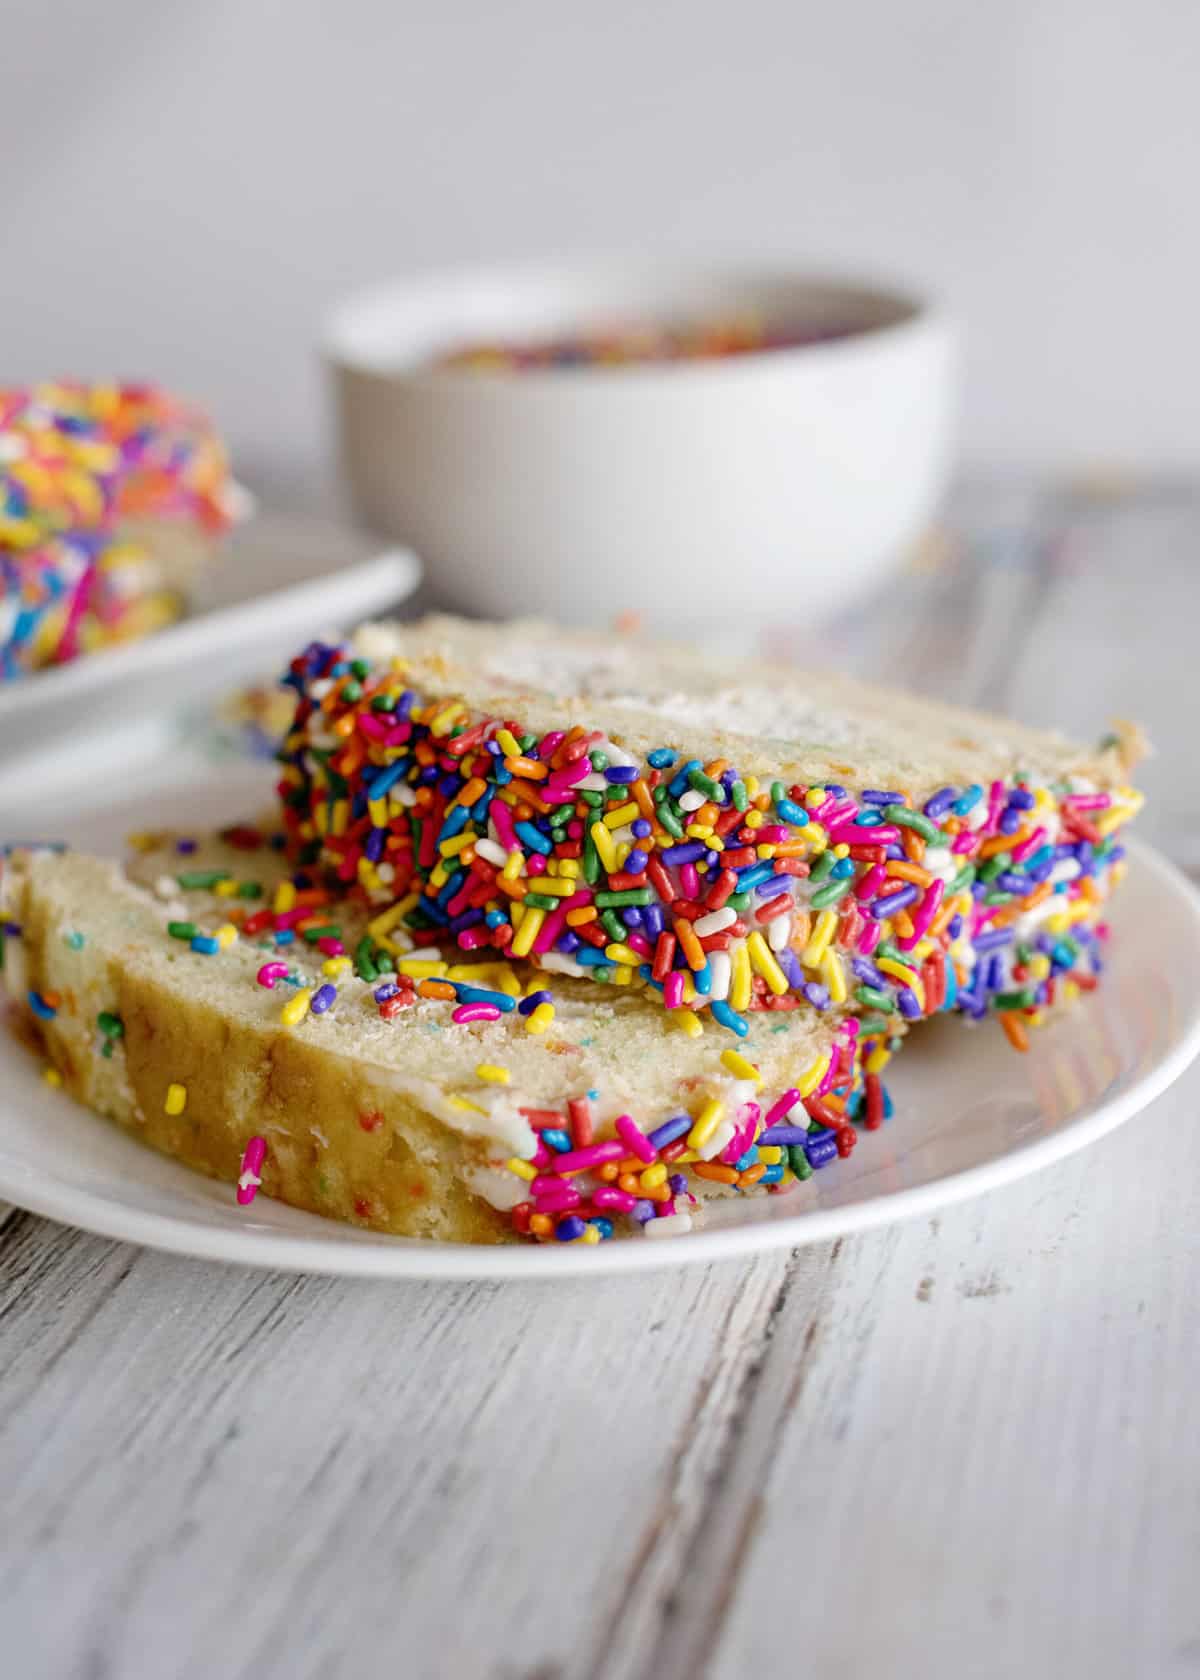 Slices of birthday cake roll on a plate.